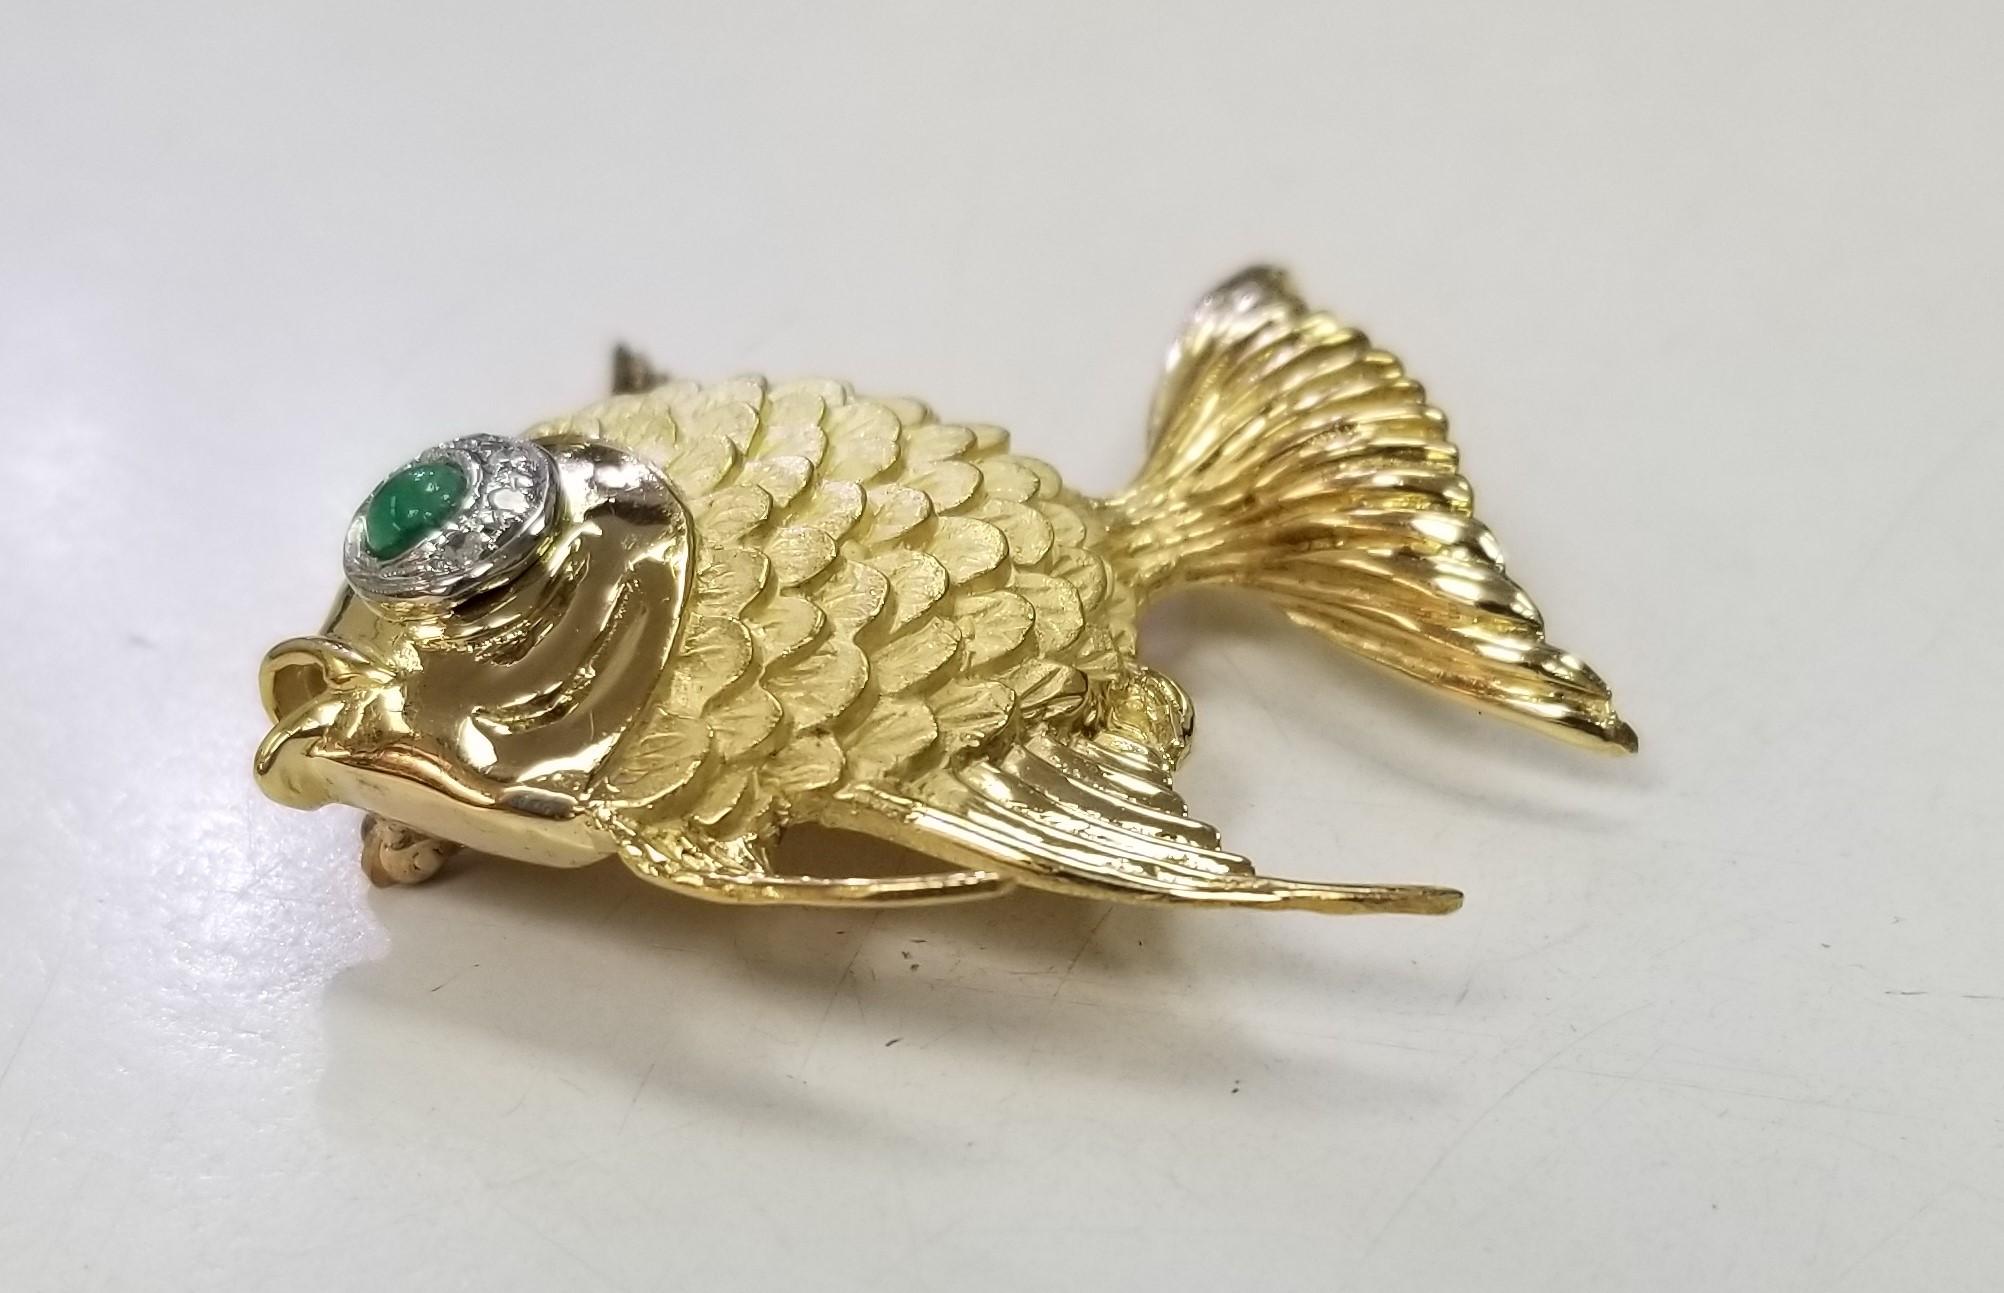 Item specifics
Condition
Pre-owned
Seller Notes
“GRAET CONDITION”
Brand Undisclosed
Color Gold
Main Stone Emerald  Cabochon .10pts
Secondary Stone 5 Diamond .05pts.
Metal Yellow Gold
Metal Purity 18k
Weight 14.15 Grams 
Type Brooch
